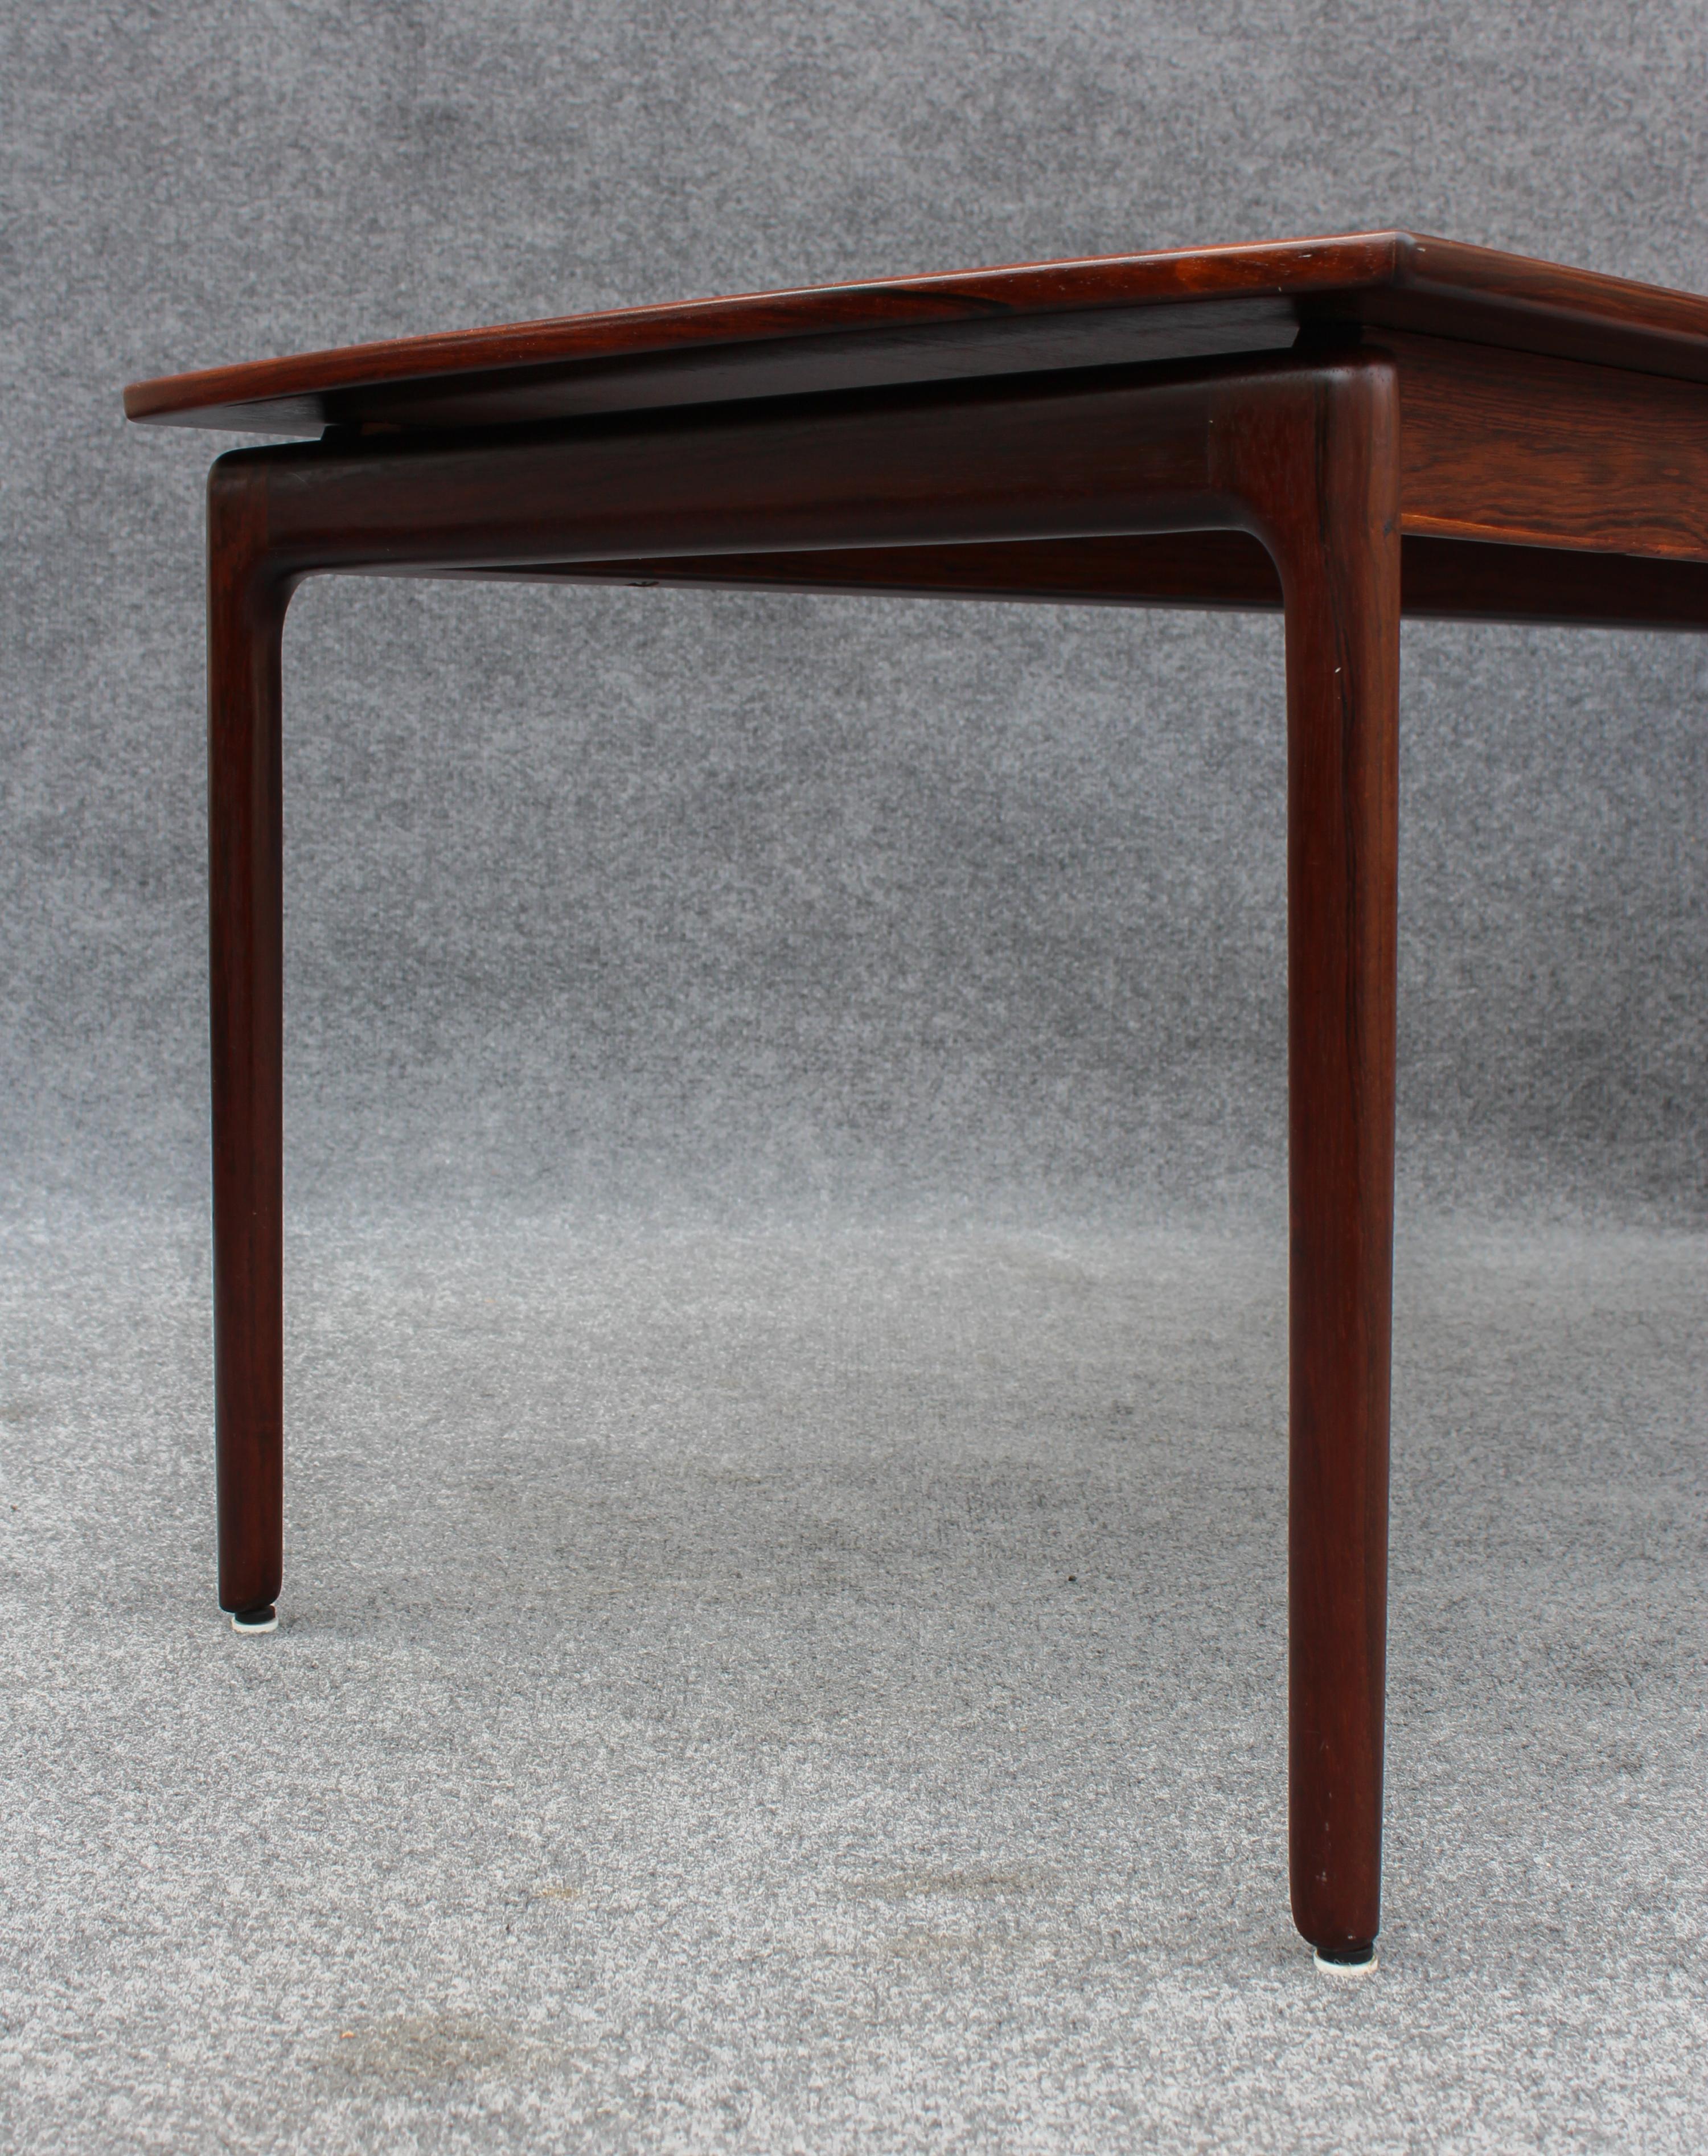 Mid-20th Century Fully Restored & Rare Ole Wanscher Floating Top Rosewood Coffee Table 1960s For Sale